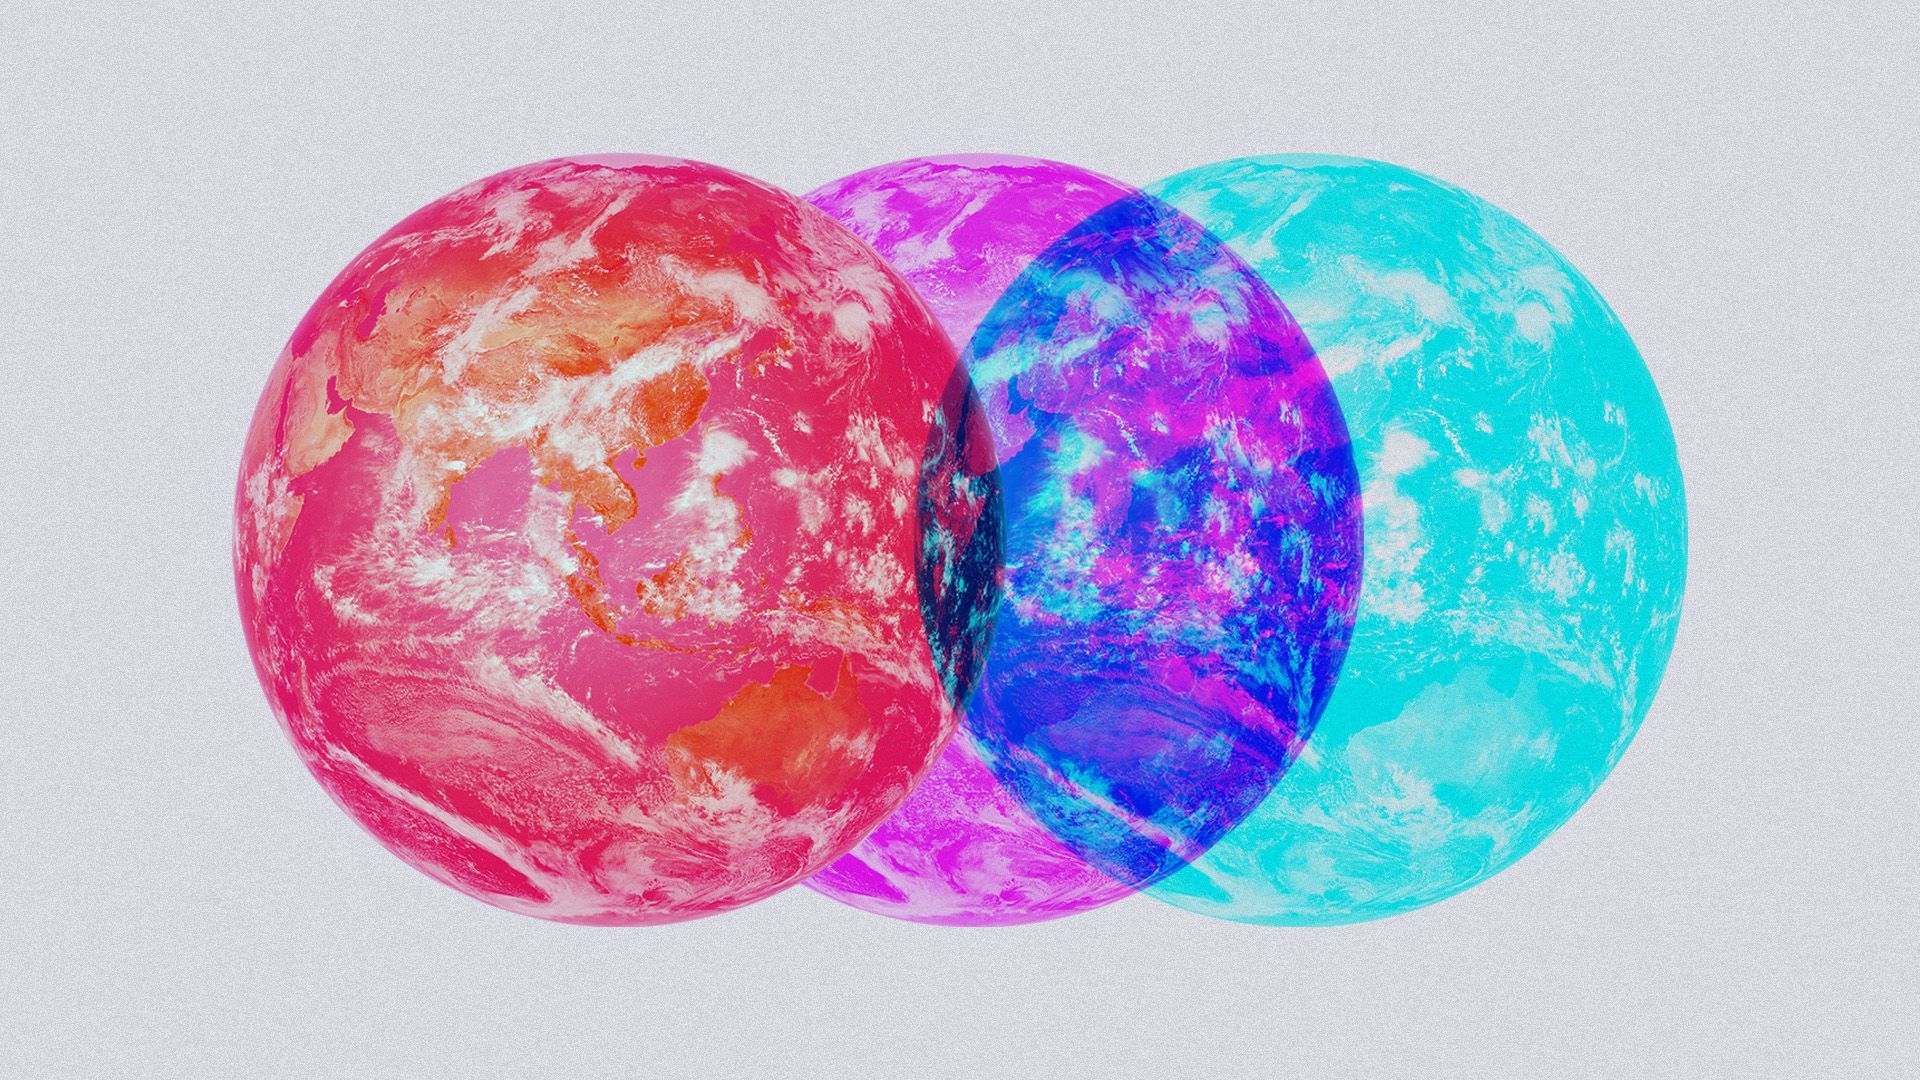 Illustration of the Earth repeated three times in different colors, creating a 3D effect